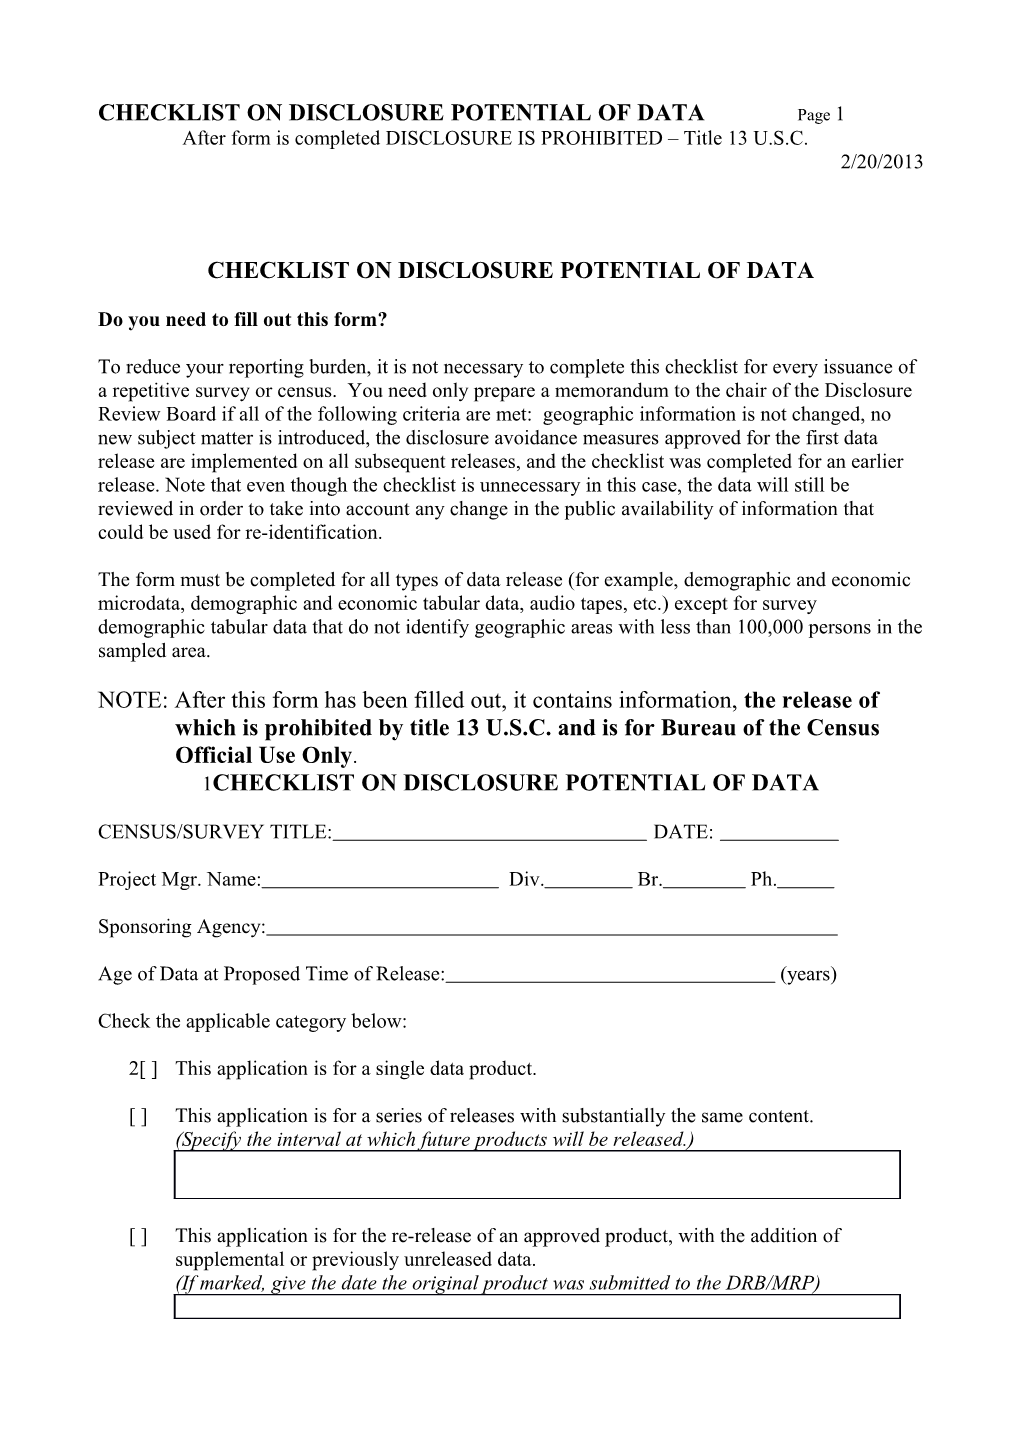 Checklist on Disclosure Potential of Data